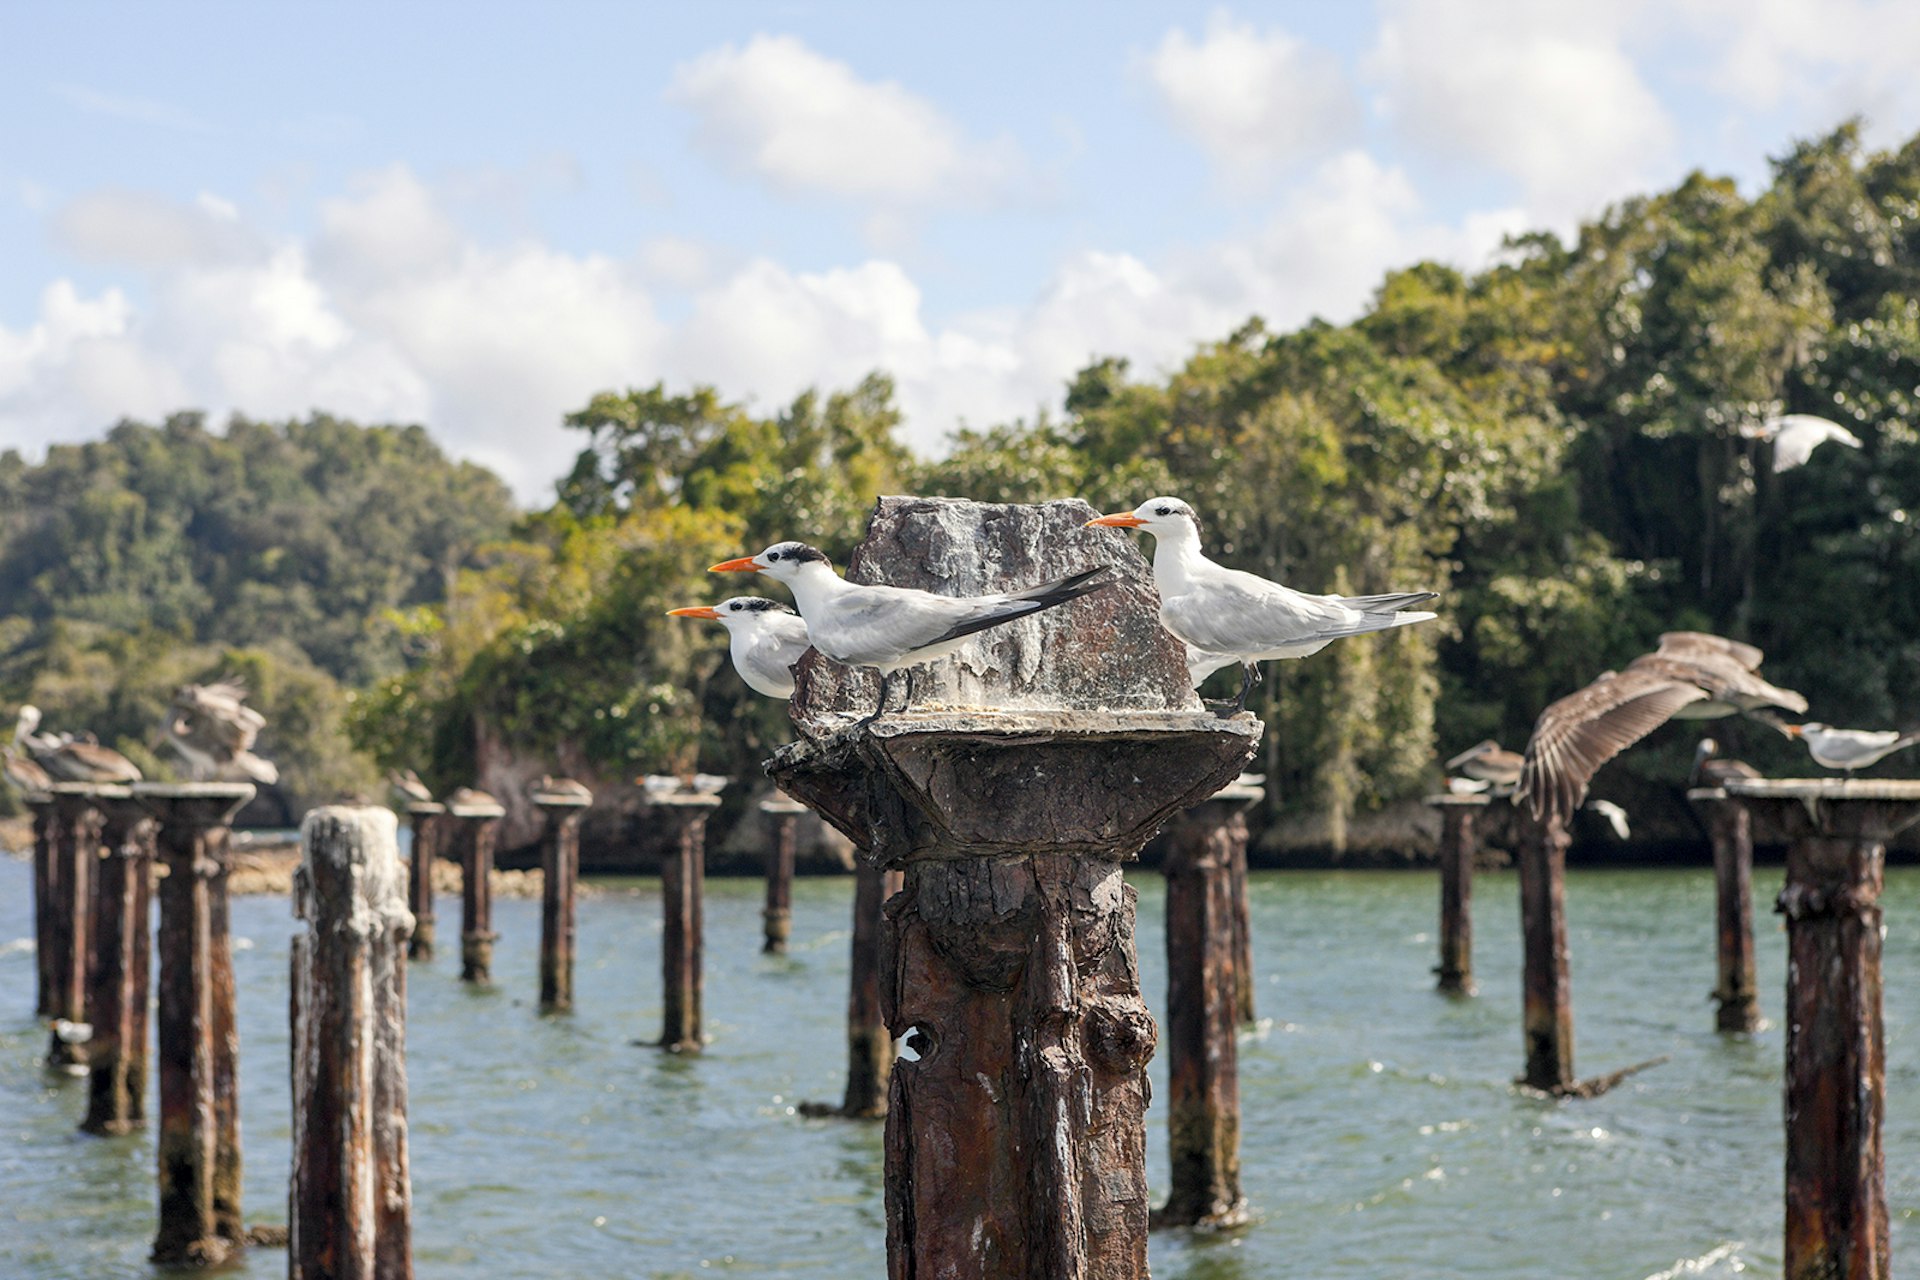 Features - Terns and Pelicanos resting on relicts of old dock, Sterna sp., Pelecanus occidentalis, Los Haitises National Park, Dominican Republic